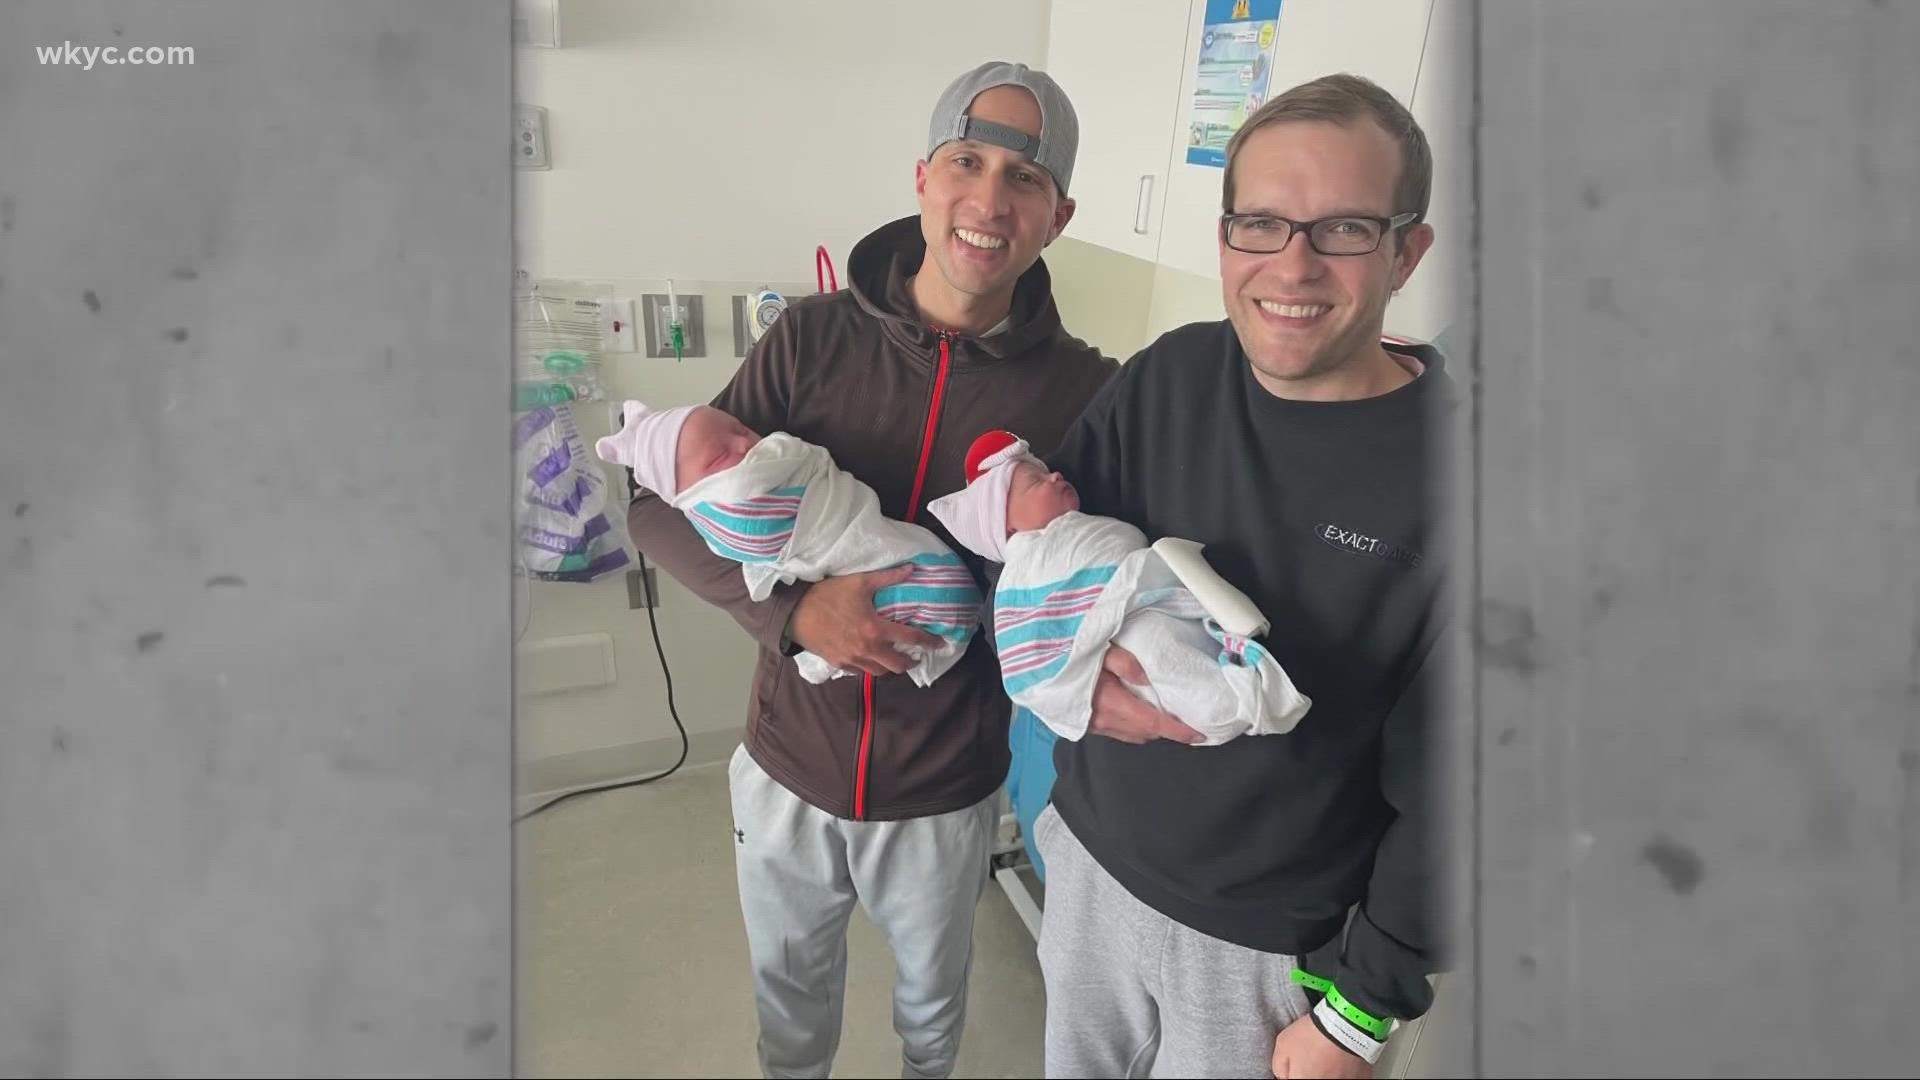 Tonight do a double take. A local family welcome two babies in case of coincidences that will surprise you and make you smile.